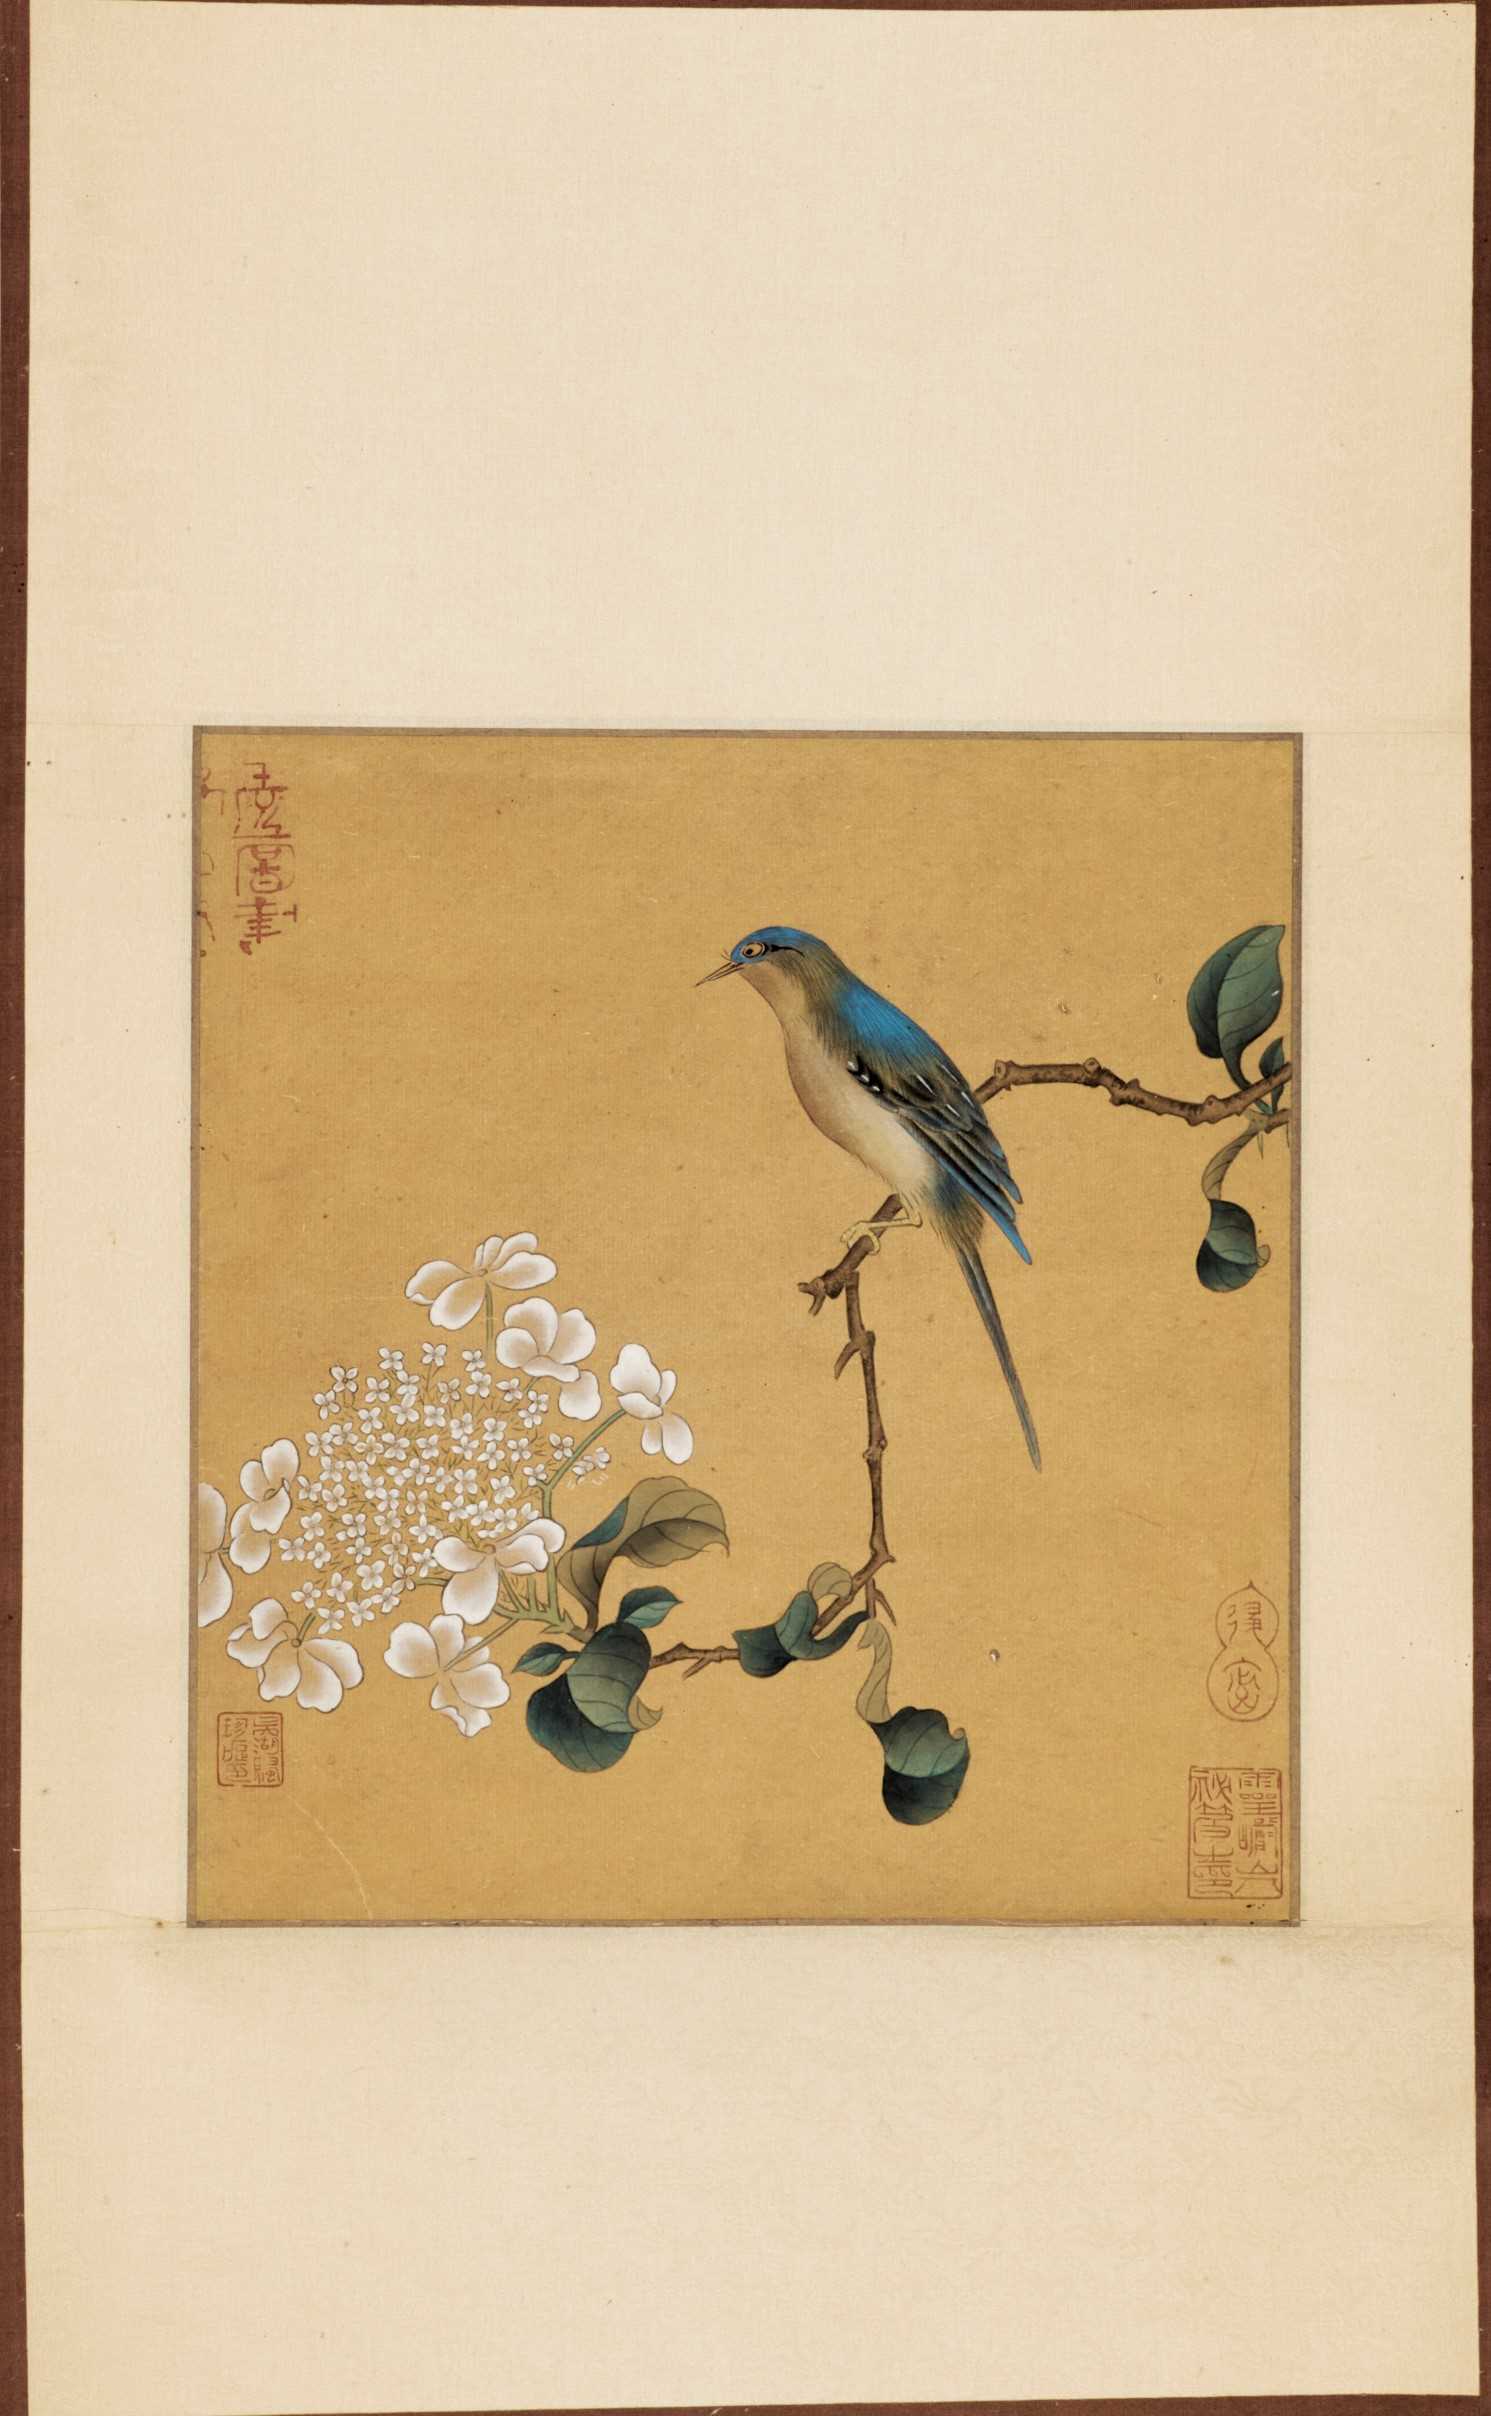 Lot 460 - A FINE HANGING SCROLL PAINTING OF A BIRD